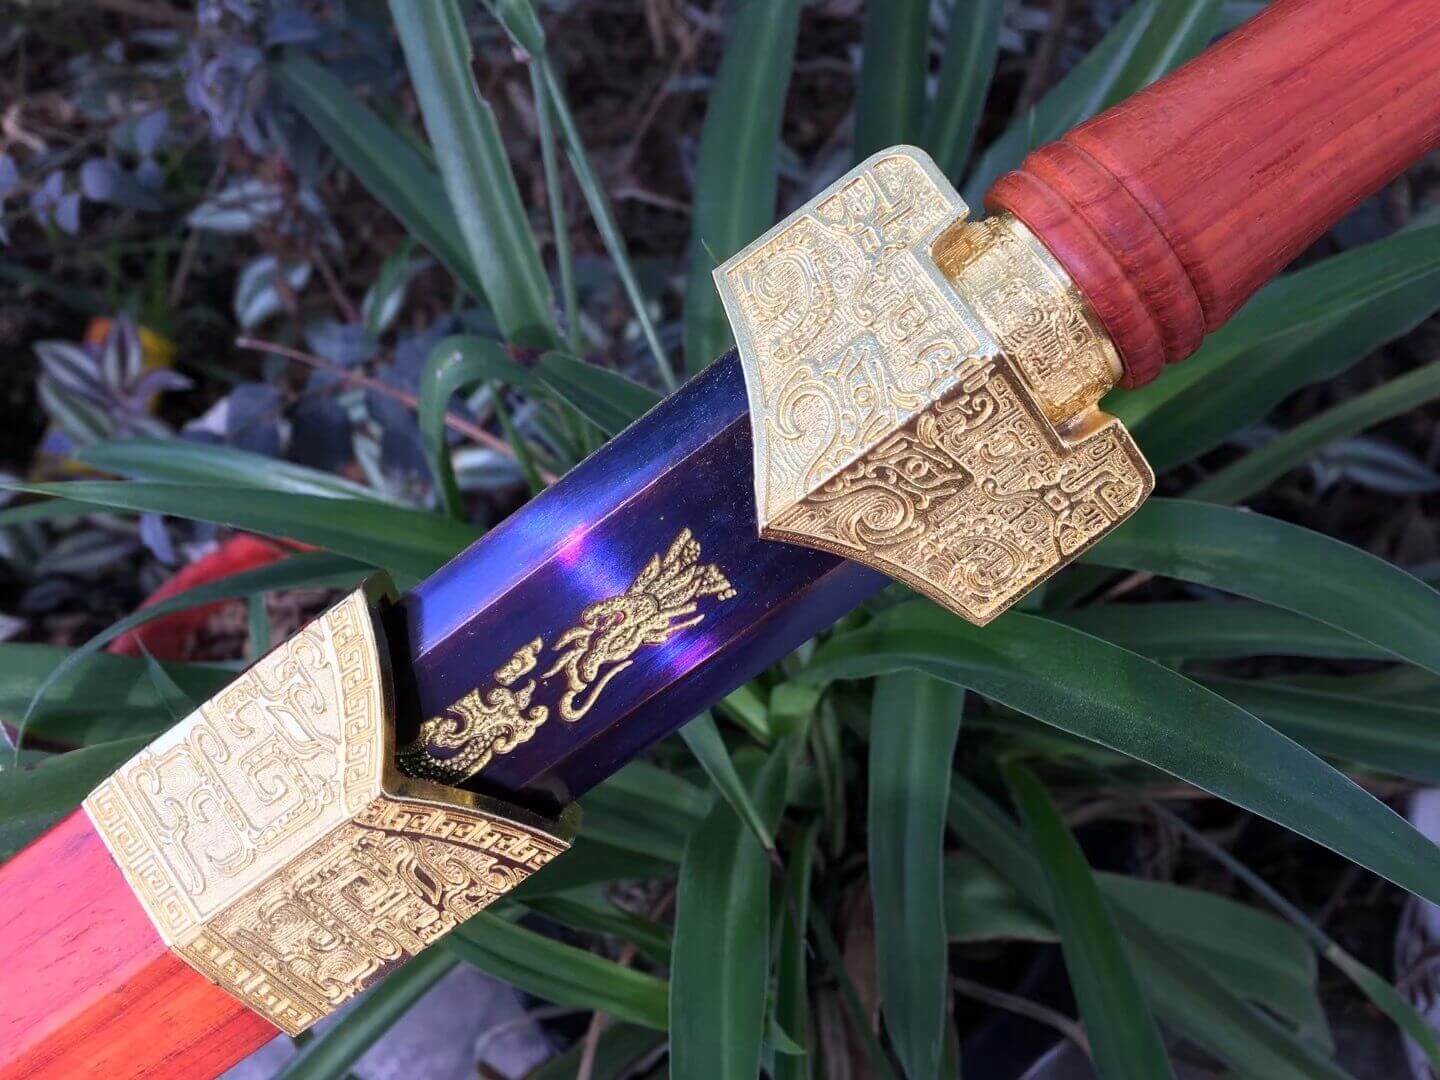 Qin sword,High carbon steel blue blade,Redwood scabbard,Alloy fittings - Chinese sword shop